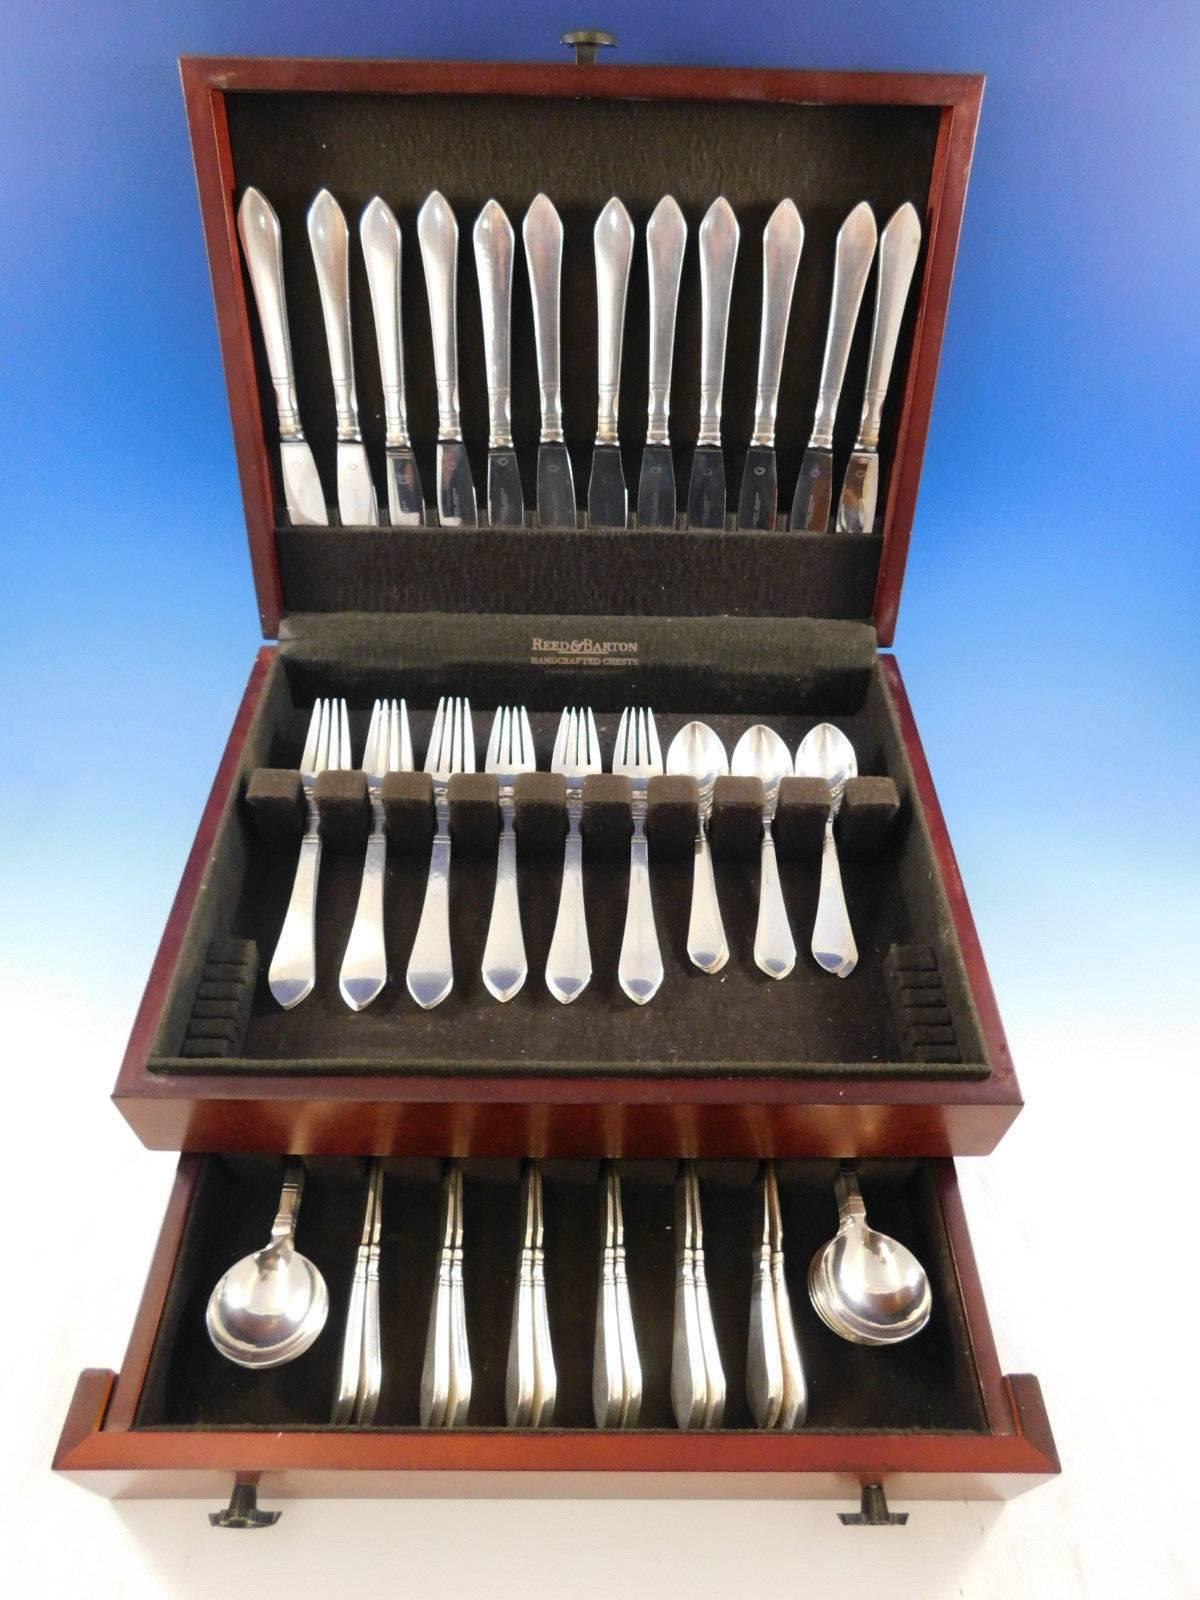 Dinner size Continental by Georg Jensen sterling silver flatware set, 72 pieces. This set includes:

12 dinner size knives, long handle, 8 7/8